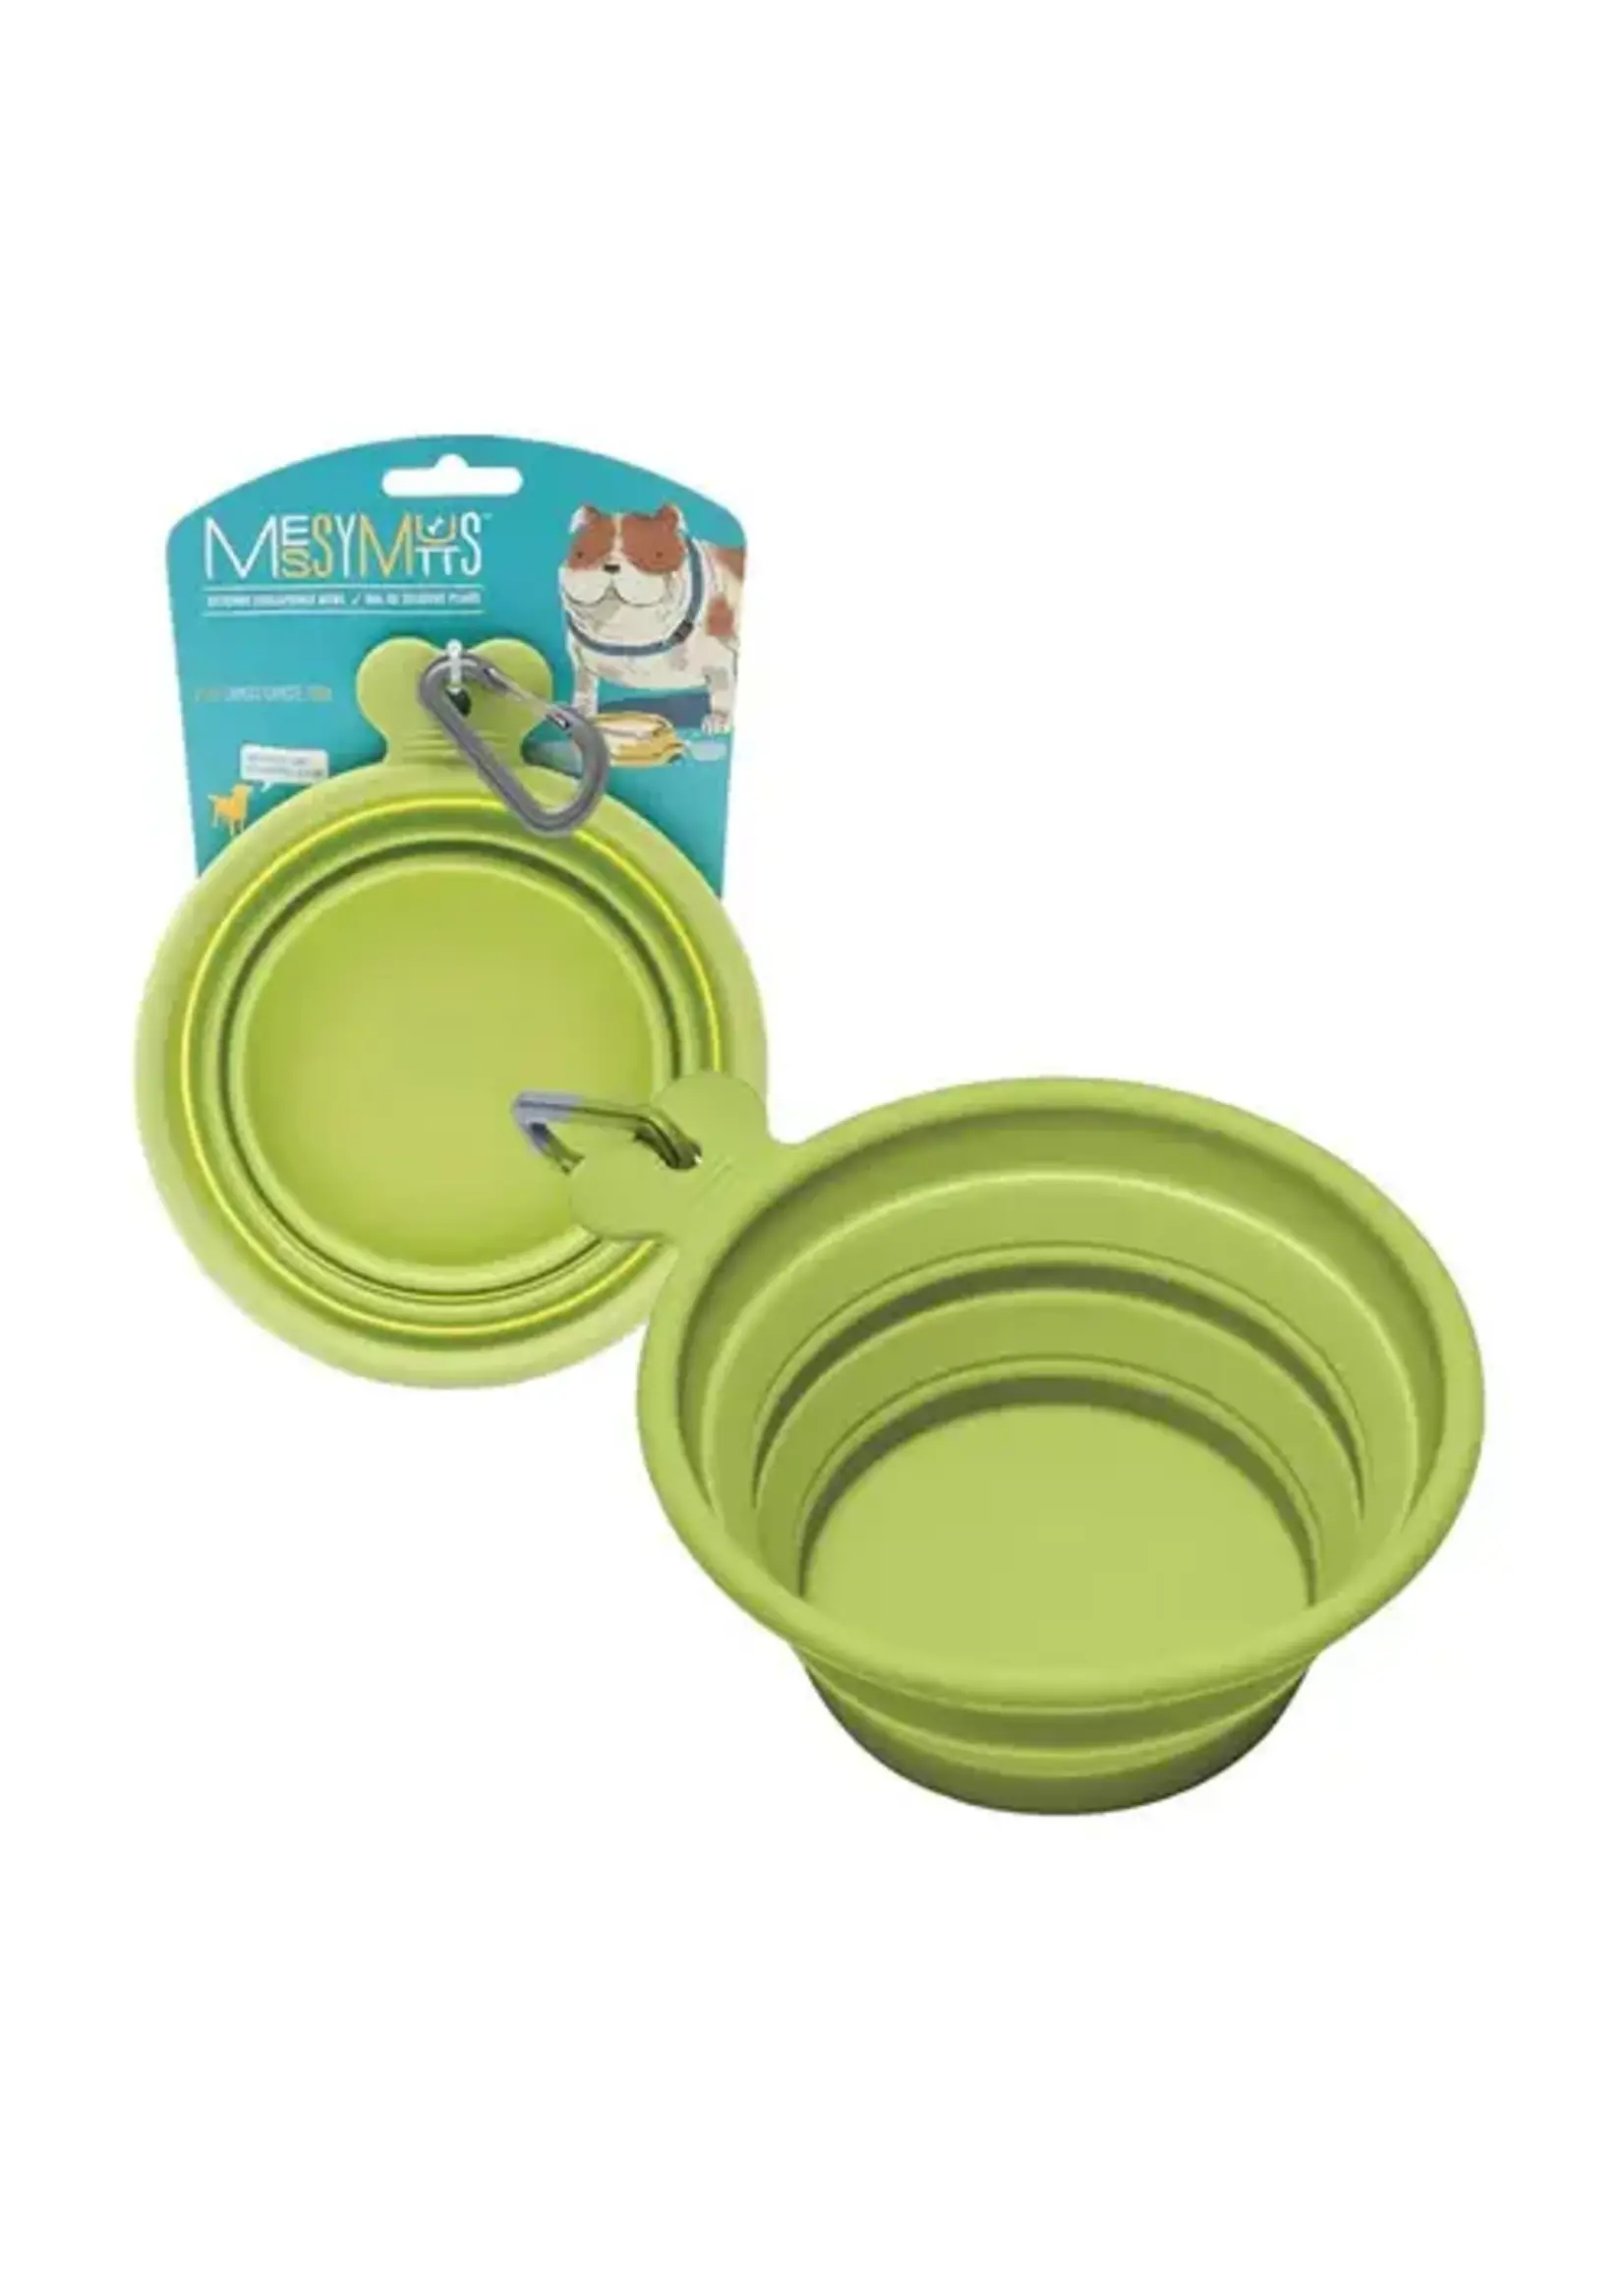 Messy Mutts Messy Mutts - Collapsible Bowl